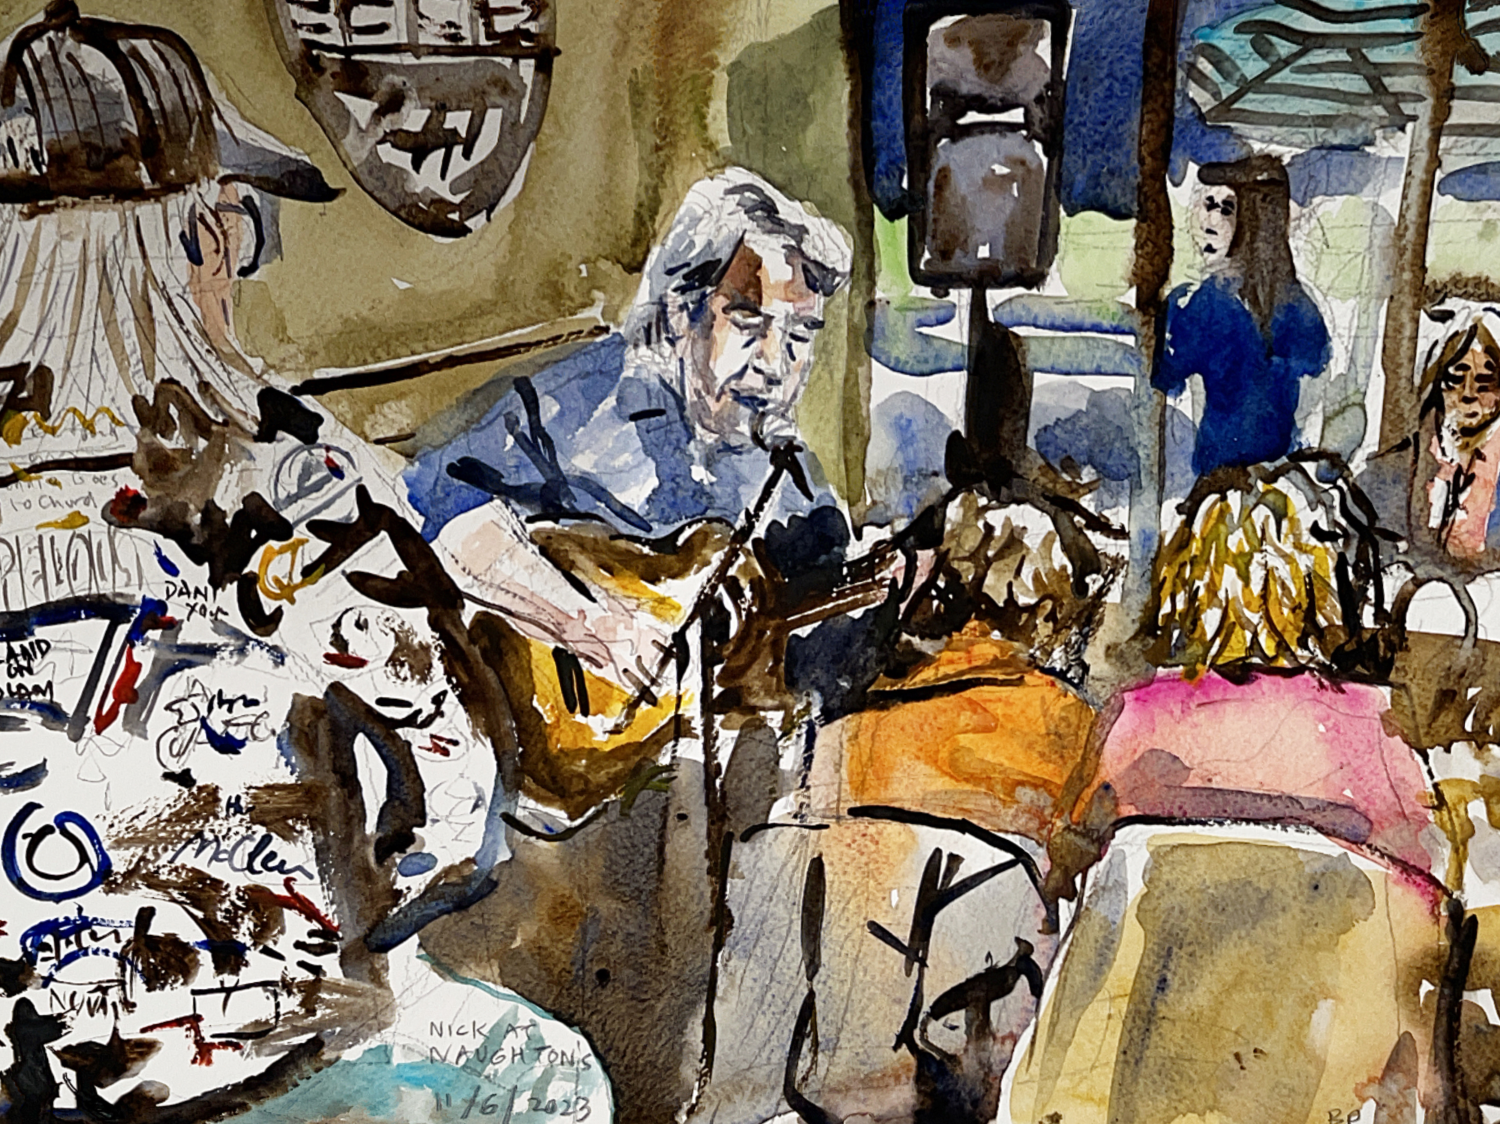 Watercolour of Nick playing at Naughton's Hotel Parkville